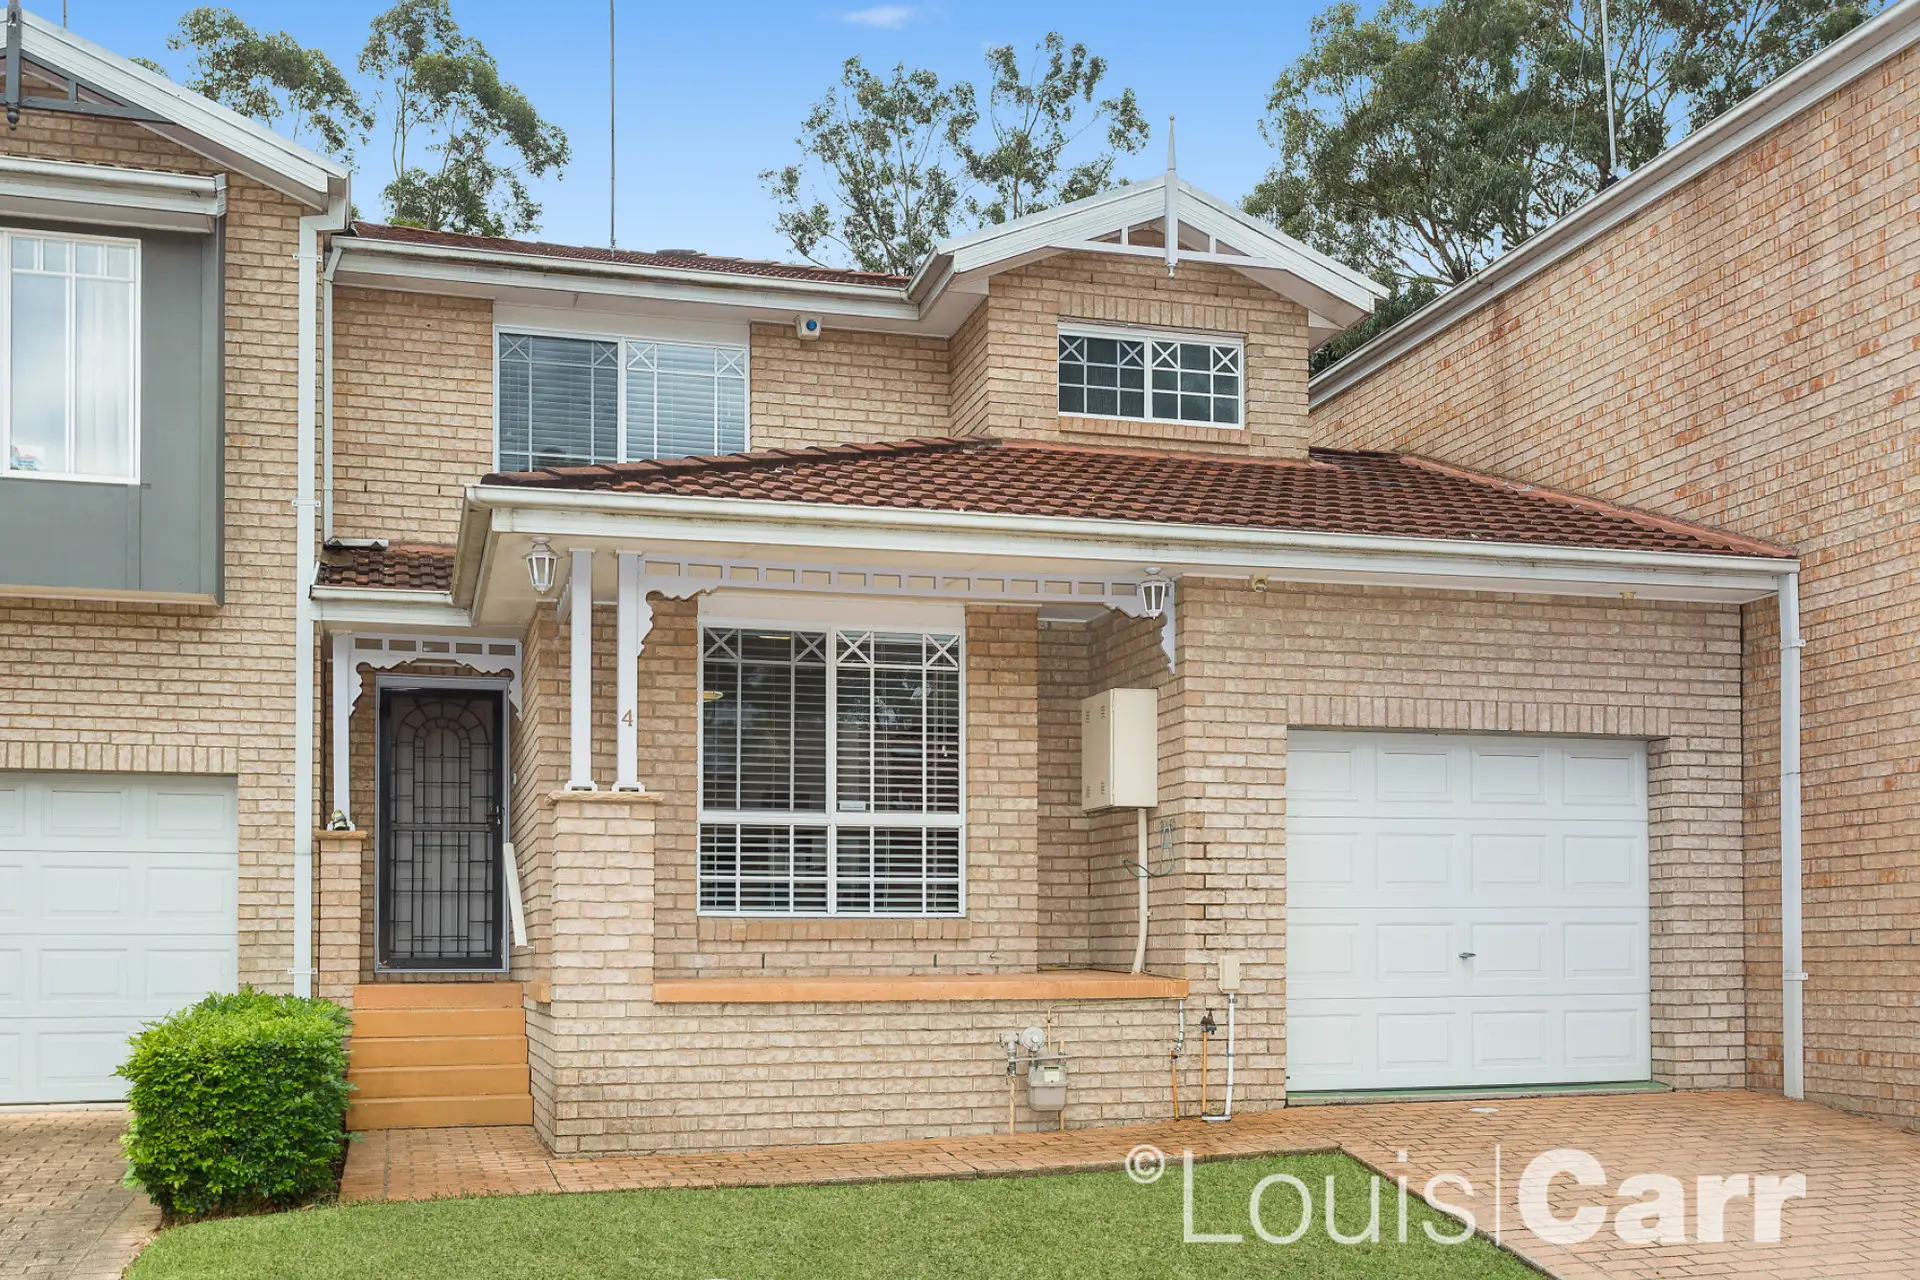 Photo #1: 4 Hallam Way, Cherrybrook - Sold by Louis Carr Real Estate